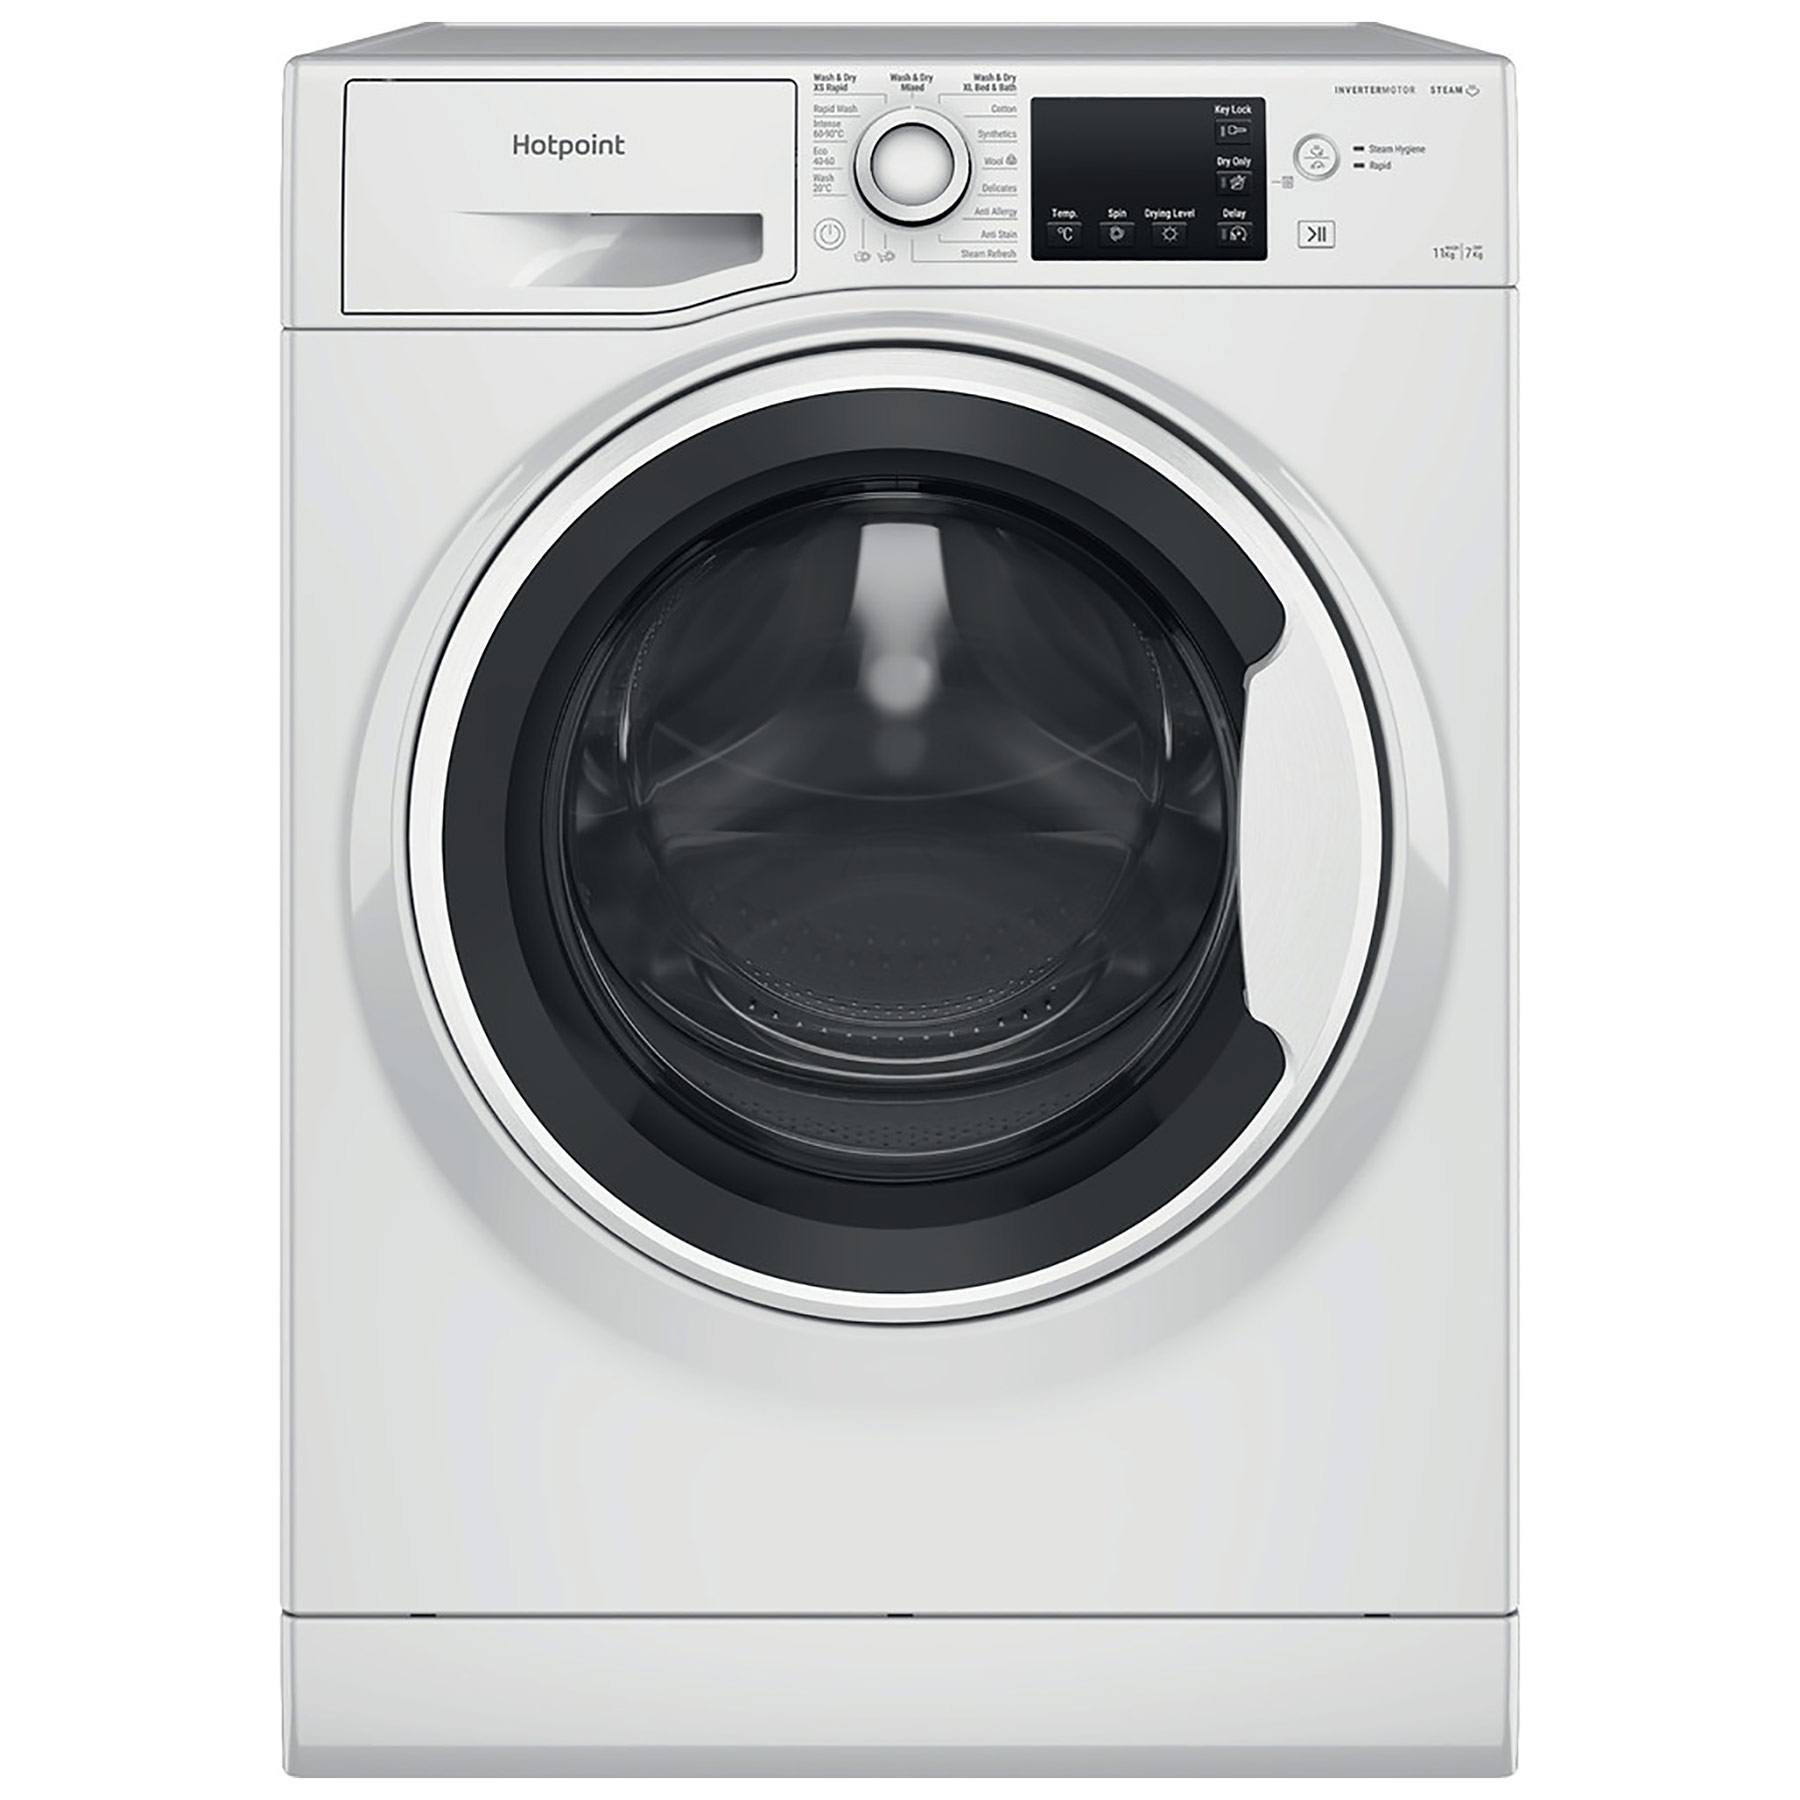 Image of Hotpoint NDB11724WUK Washer Dryer in White 1600rpm 11kg 7kg E Rated